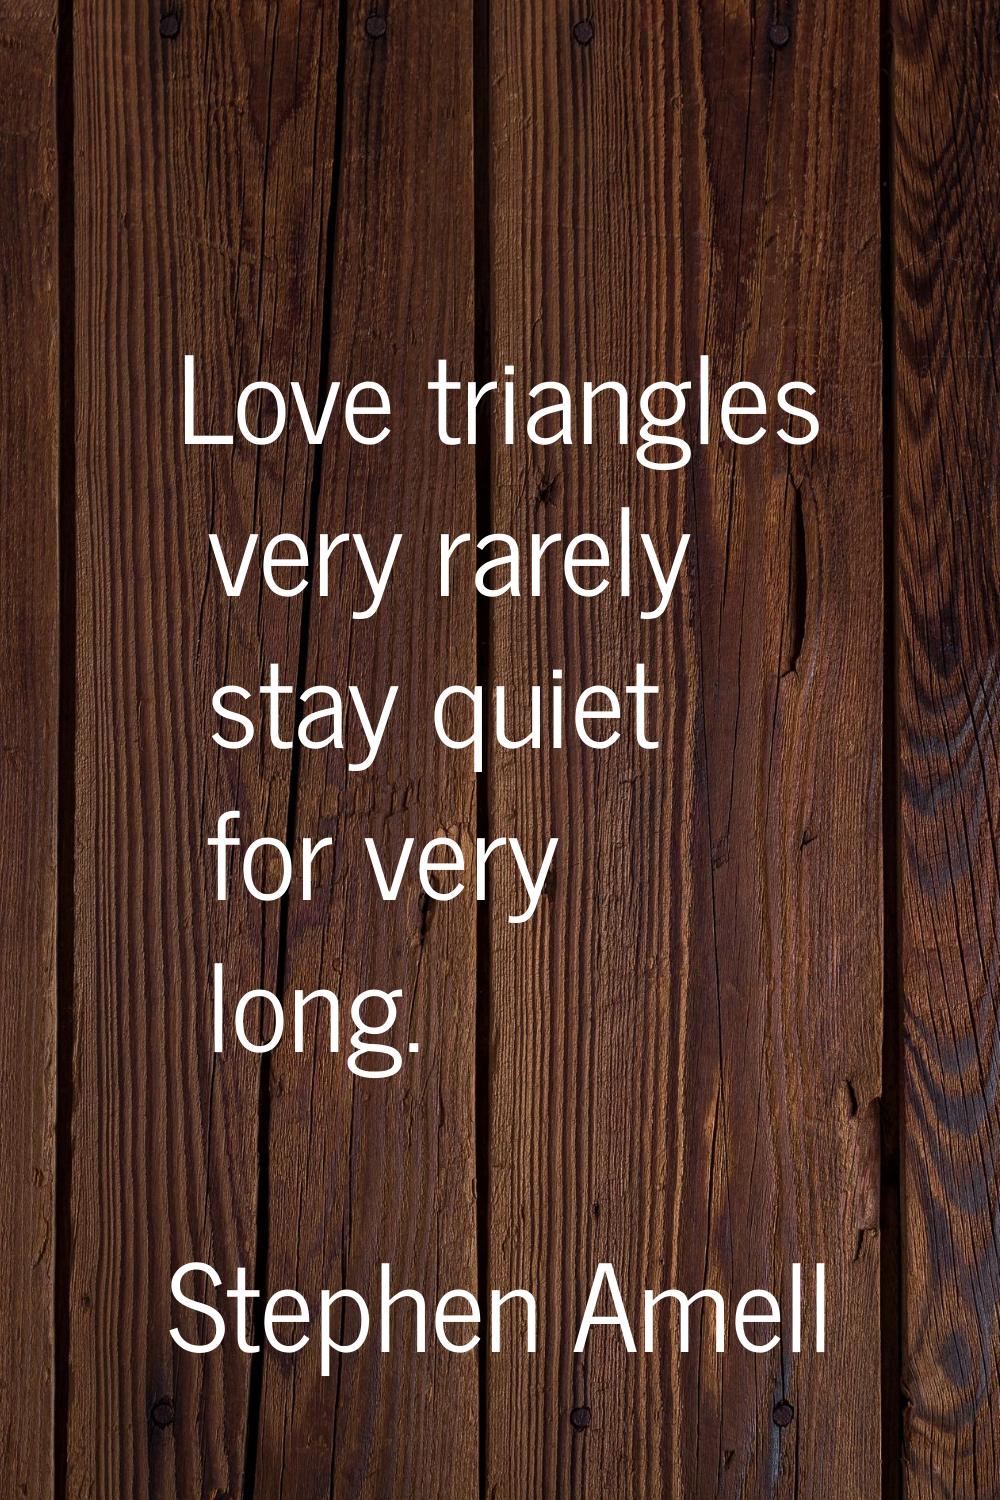 Love triangles very rarely stay quiet for very long.